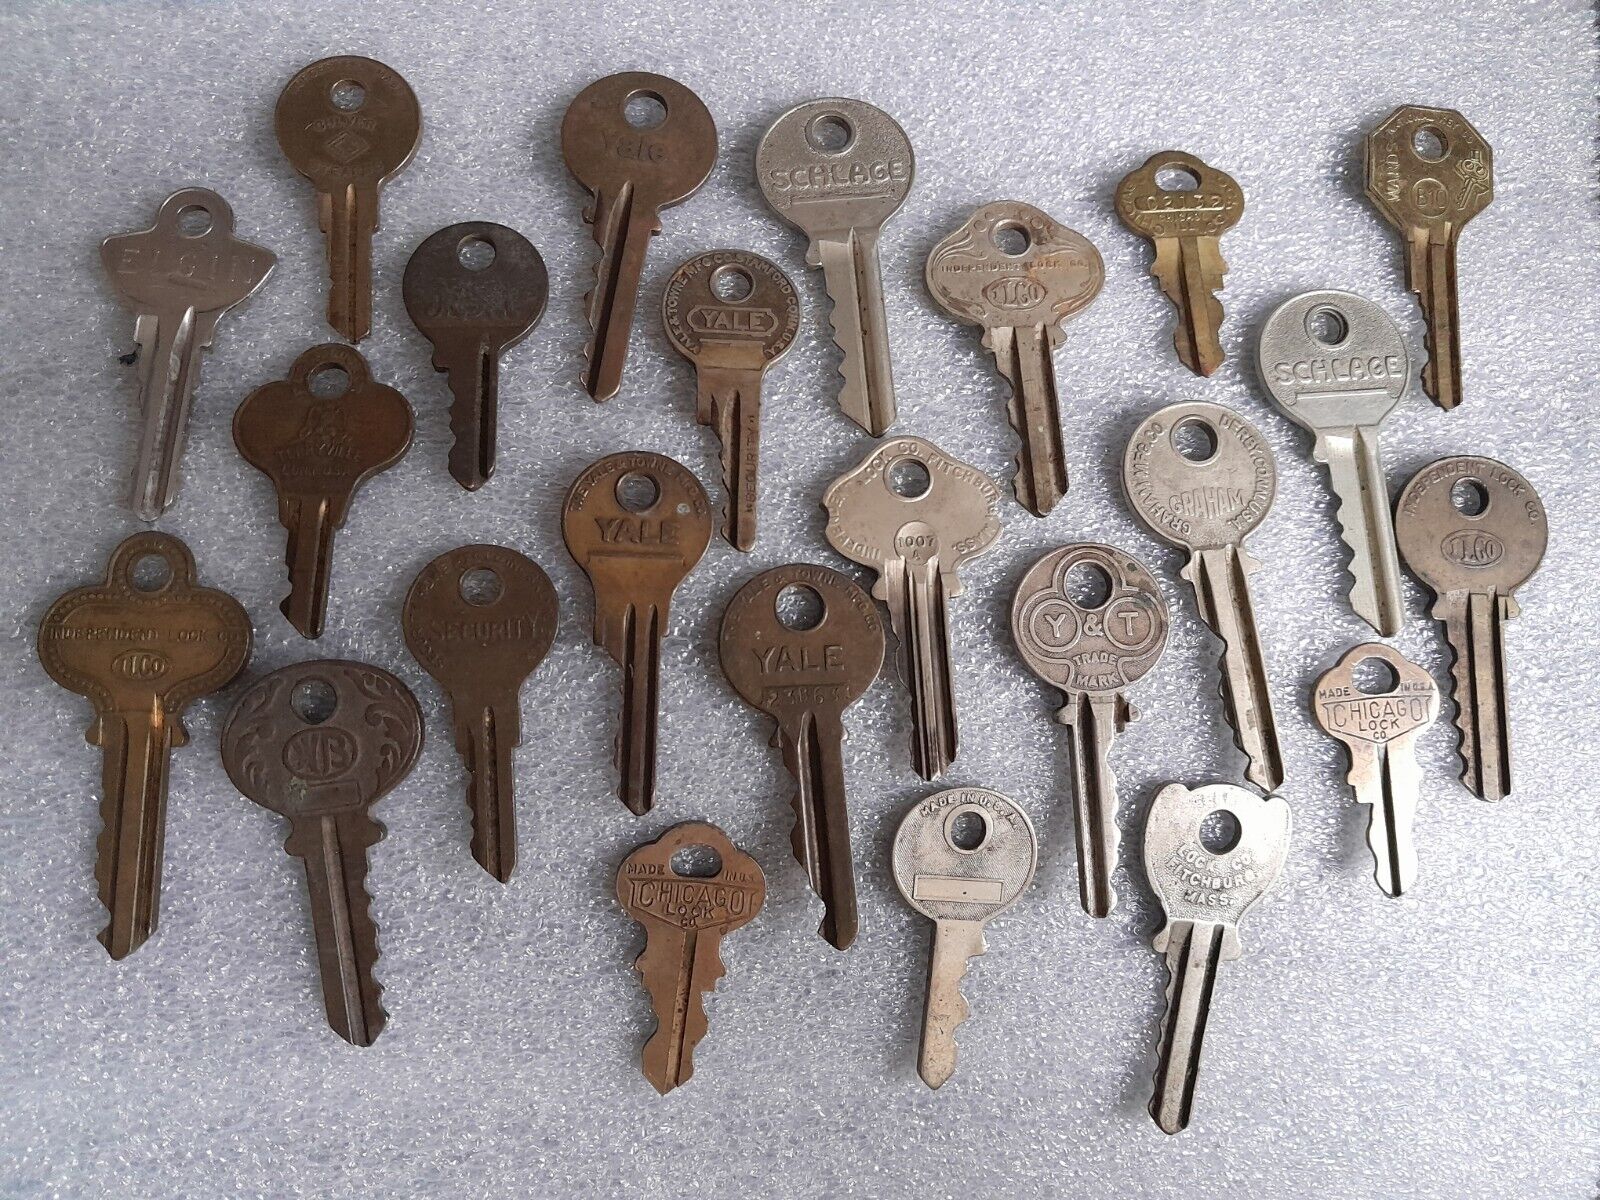 Lot Of 24 Vintage Antique Made In USA Ornate Keys Y&T Ilco Yale Schlage Etc